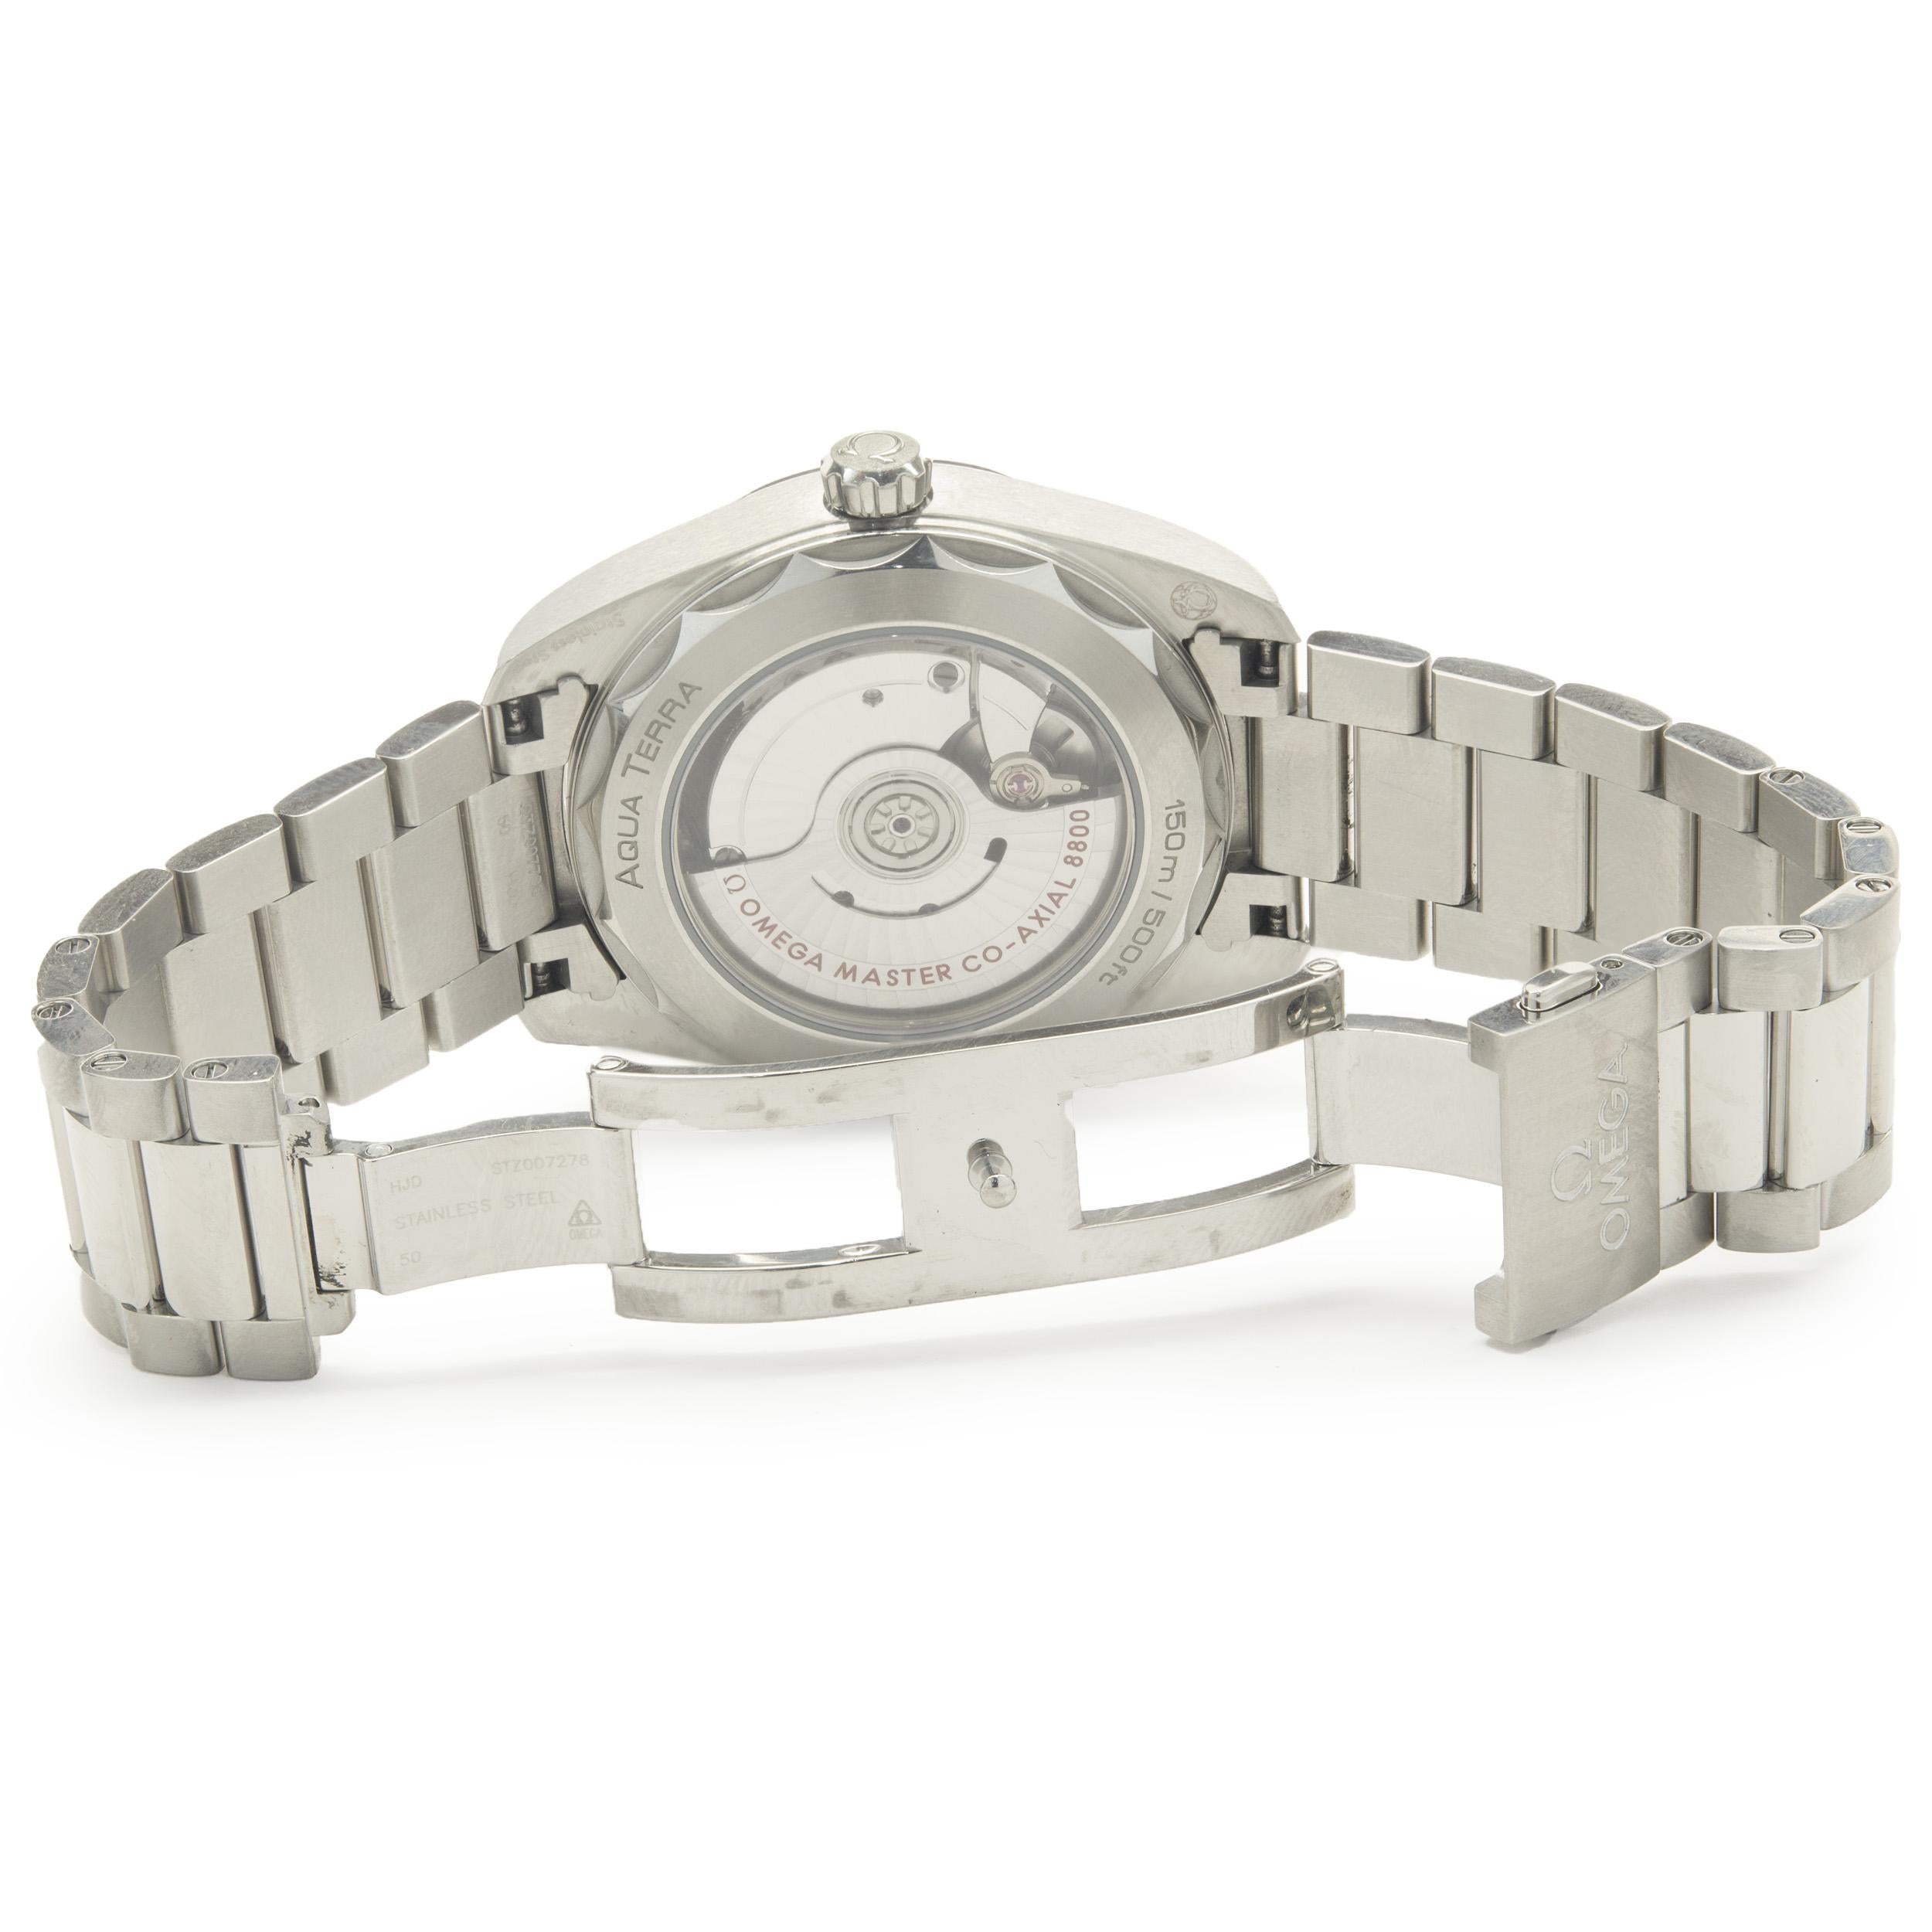 Women's or Men's Omega Stainless Steel Seamaster Co-Axial